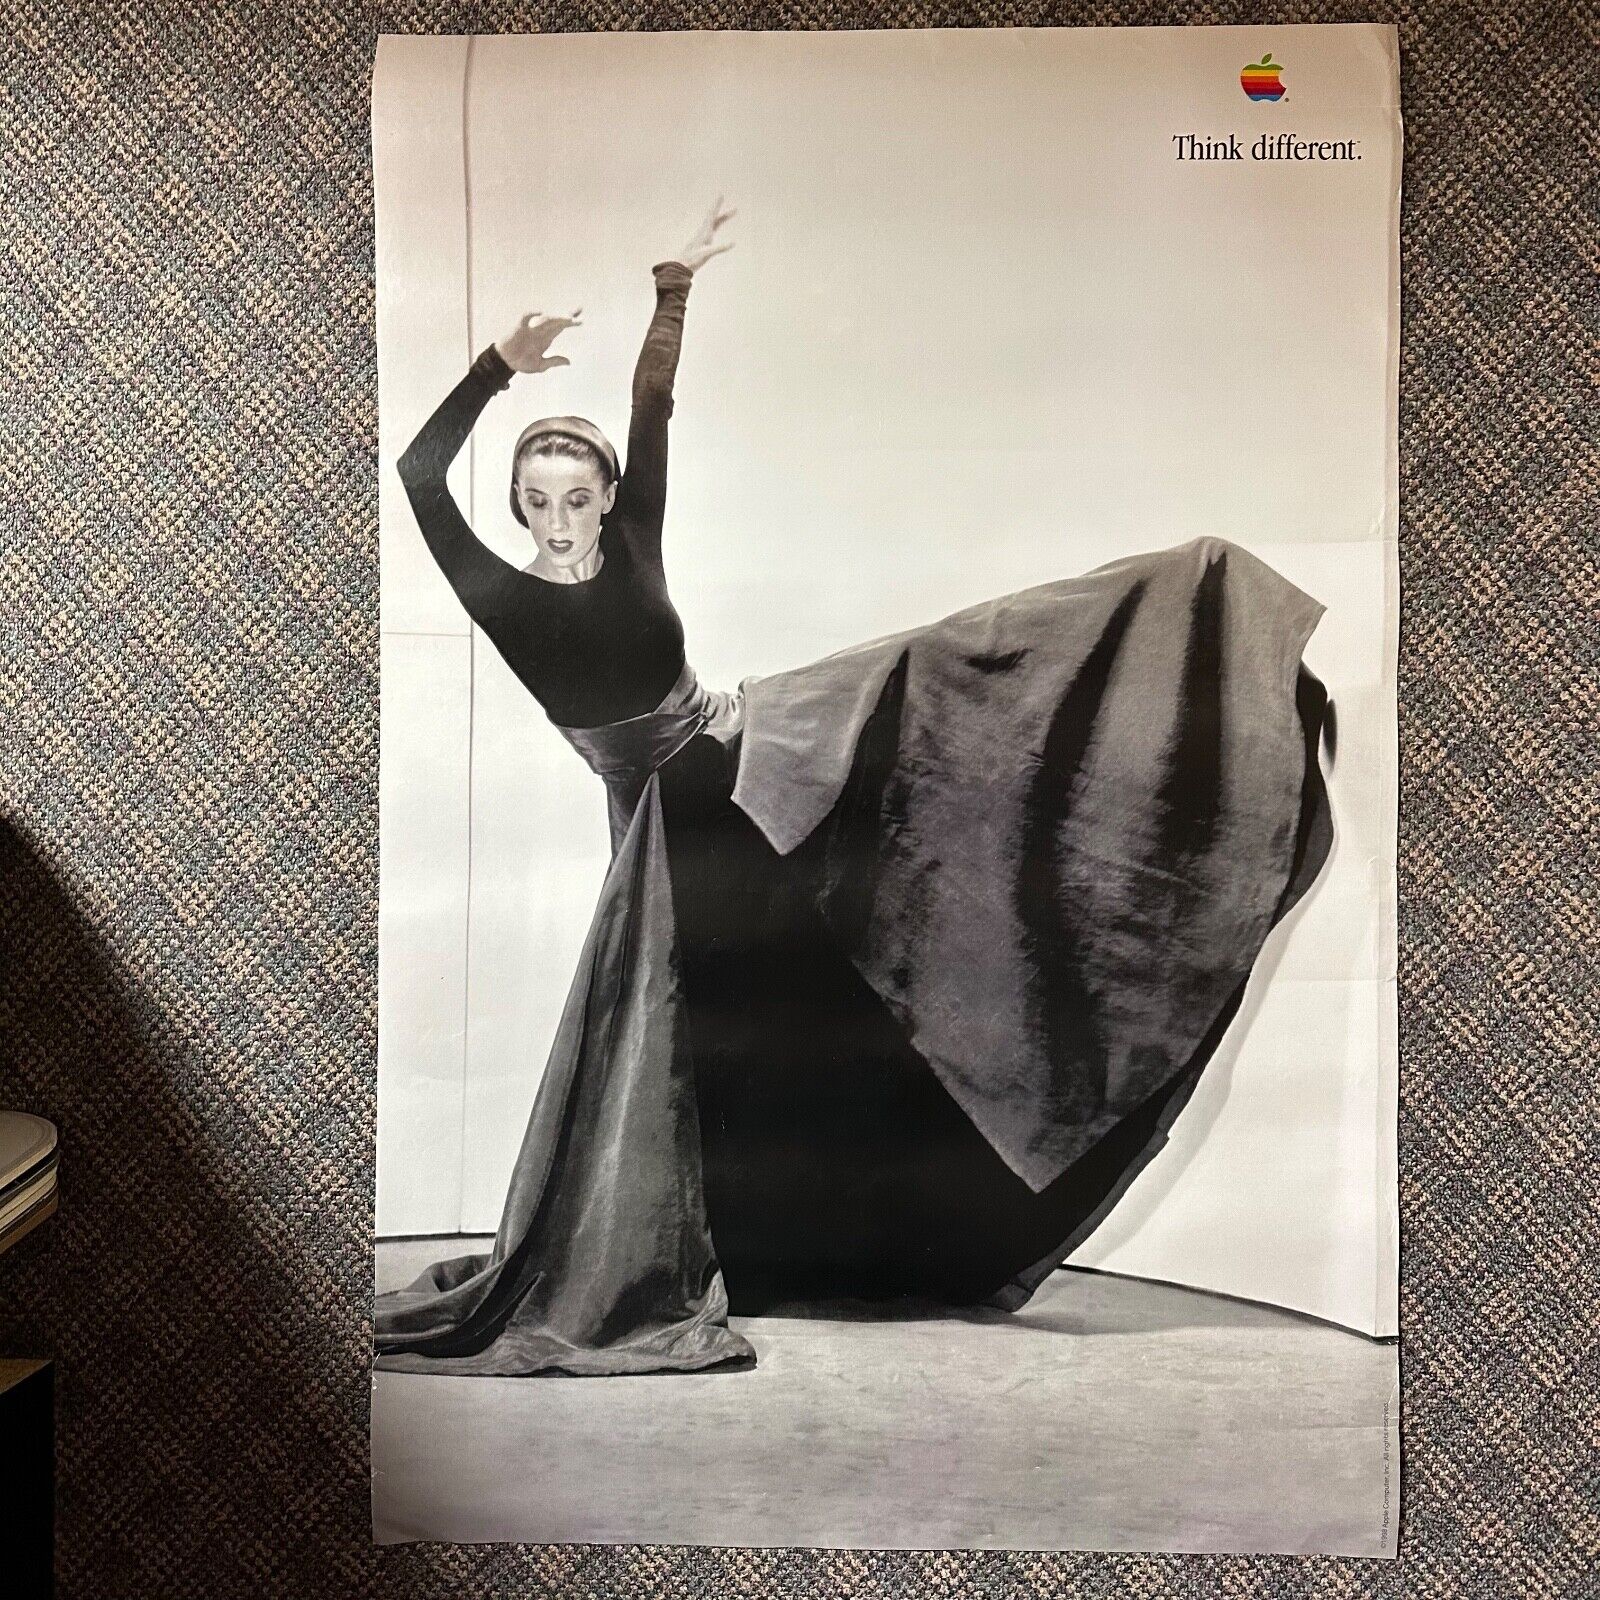 MARTHA GRAHAM__APPLE COMPUTER__Think different_RARE_AUTHENTIC POSTER __1998